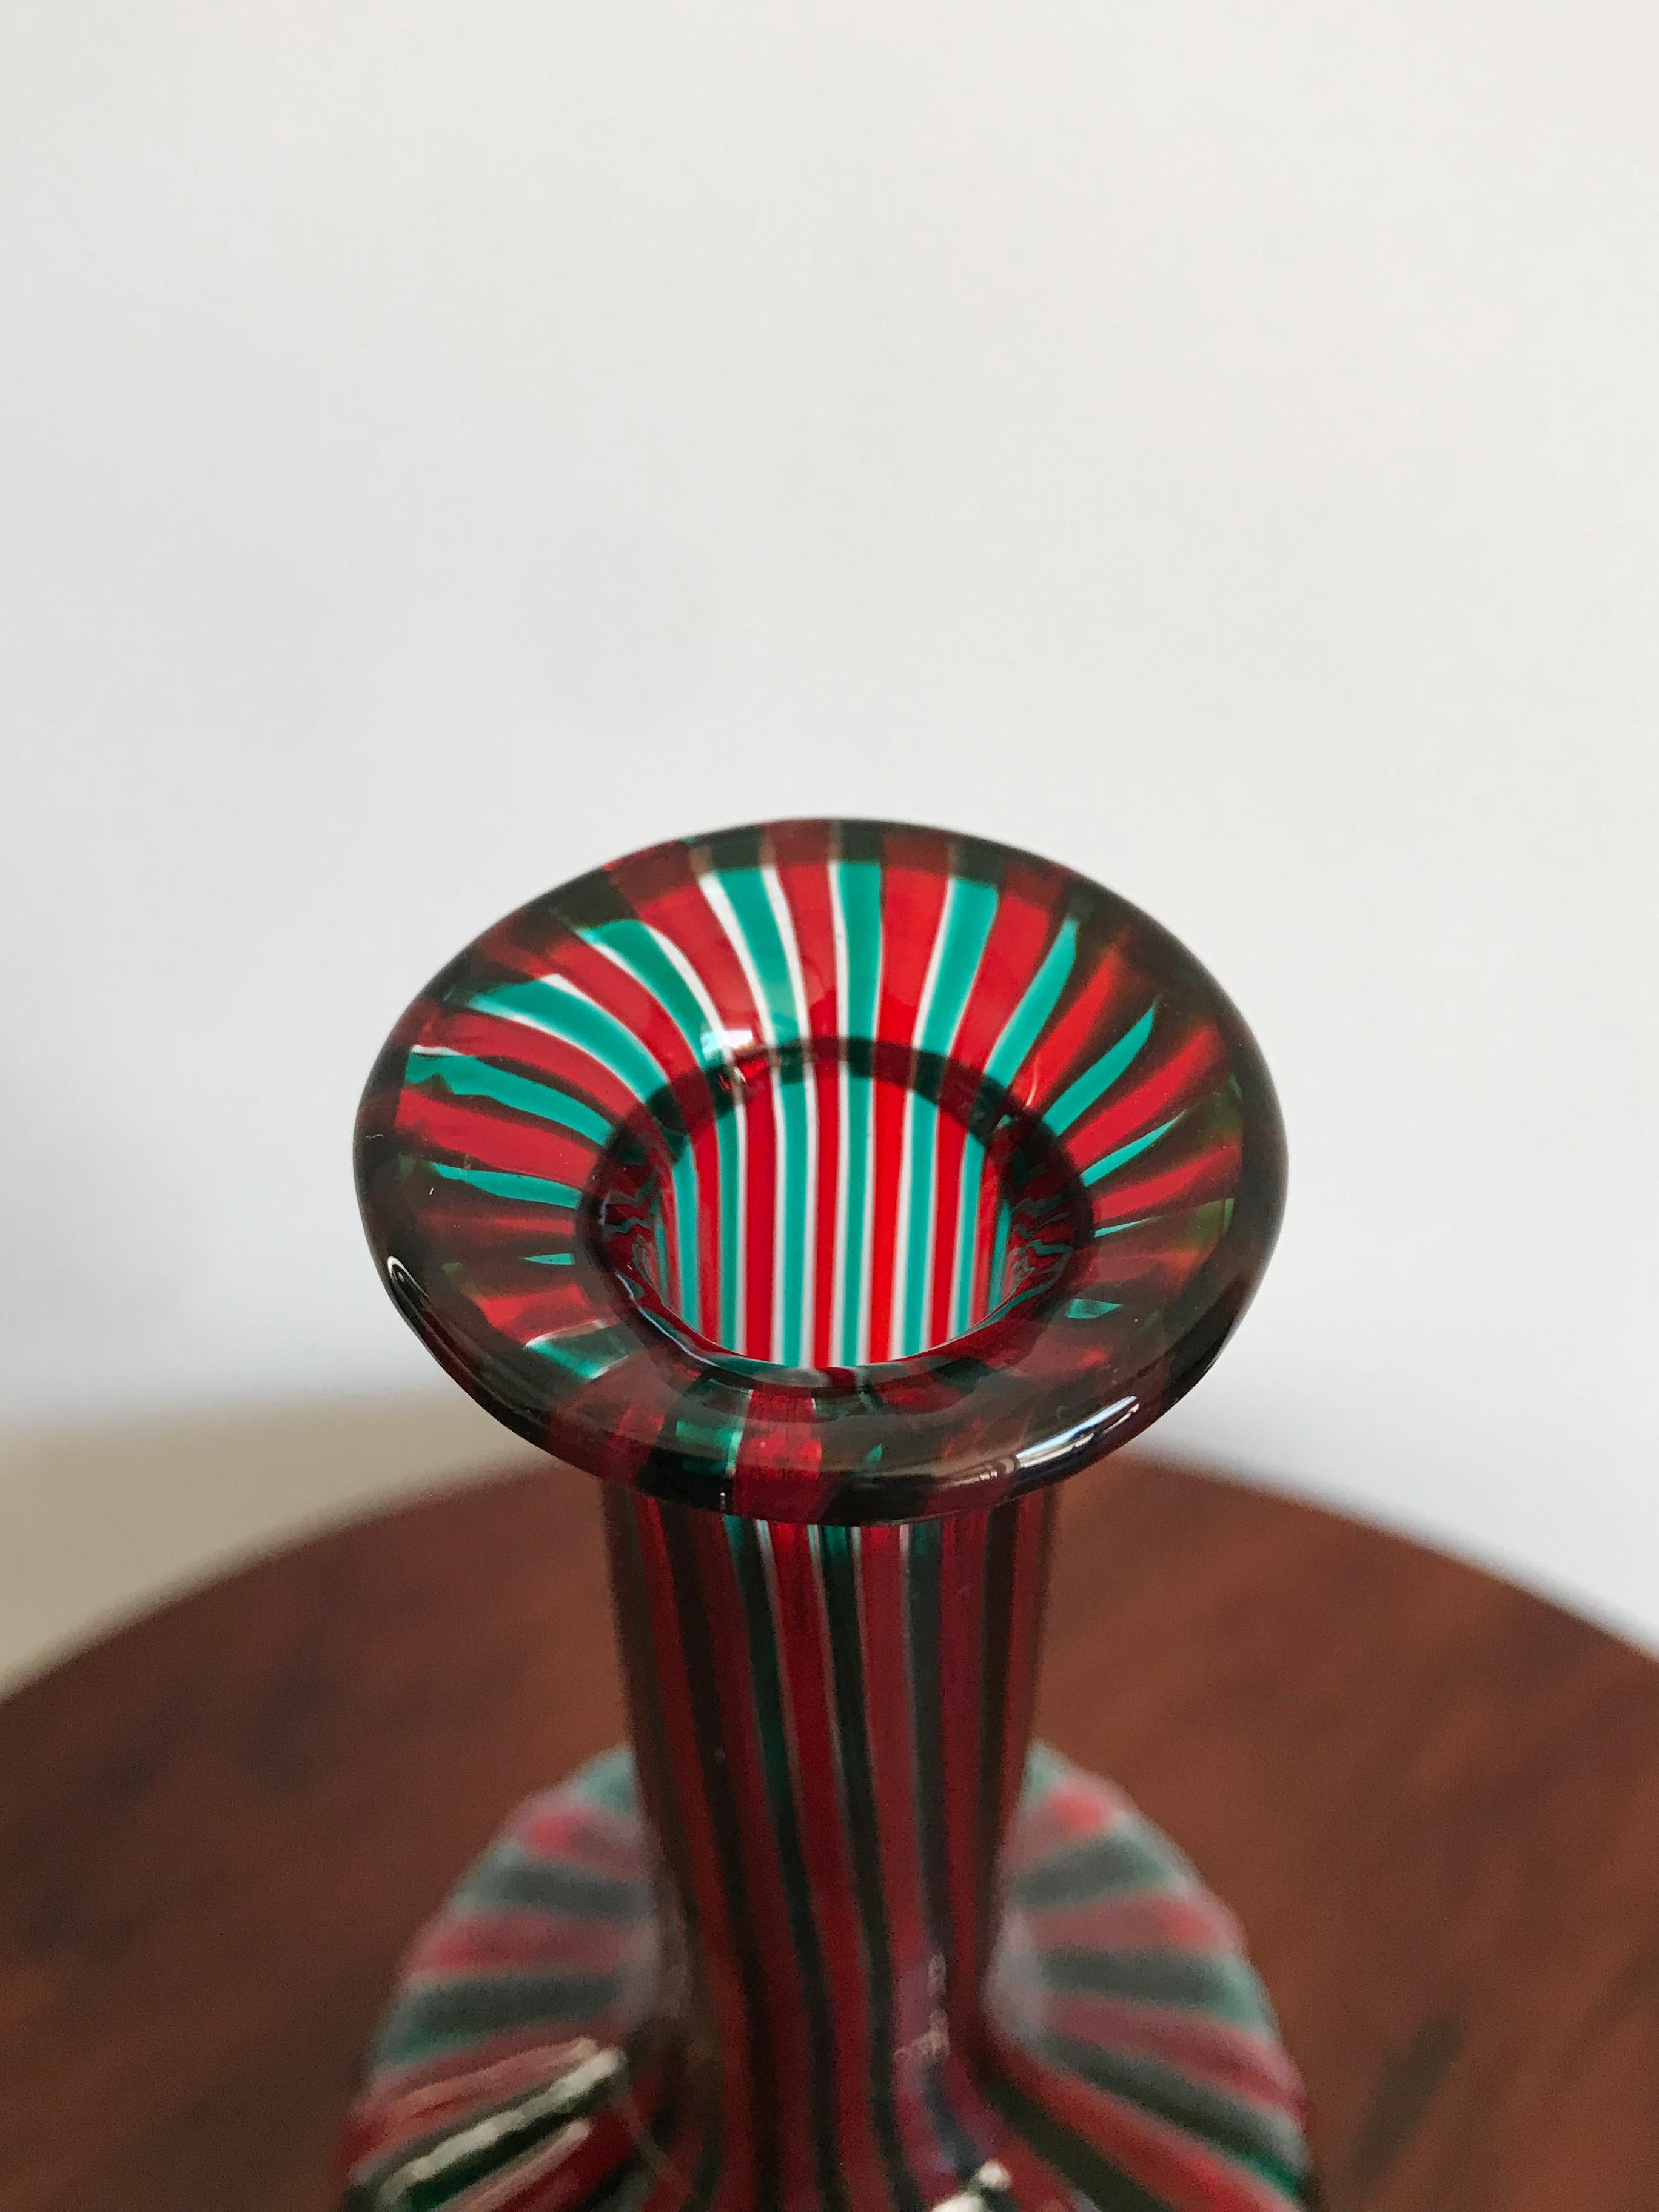 Mid-Century Modern Fulvio Bianconi for Venini Murano Italy Red and Green Glass Bottle, 1988 For Sale